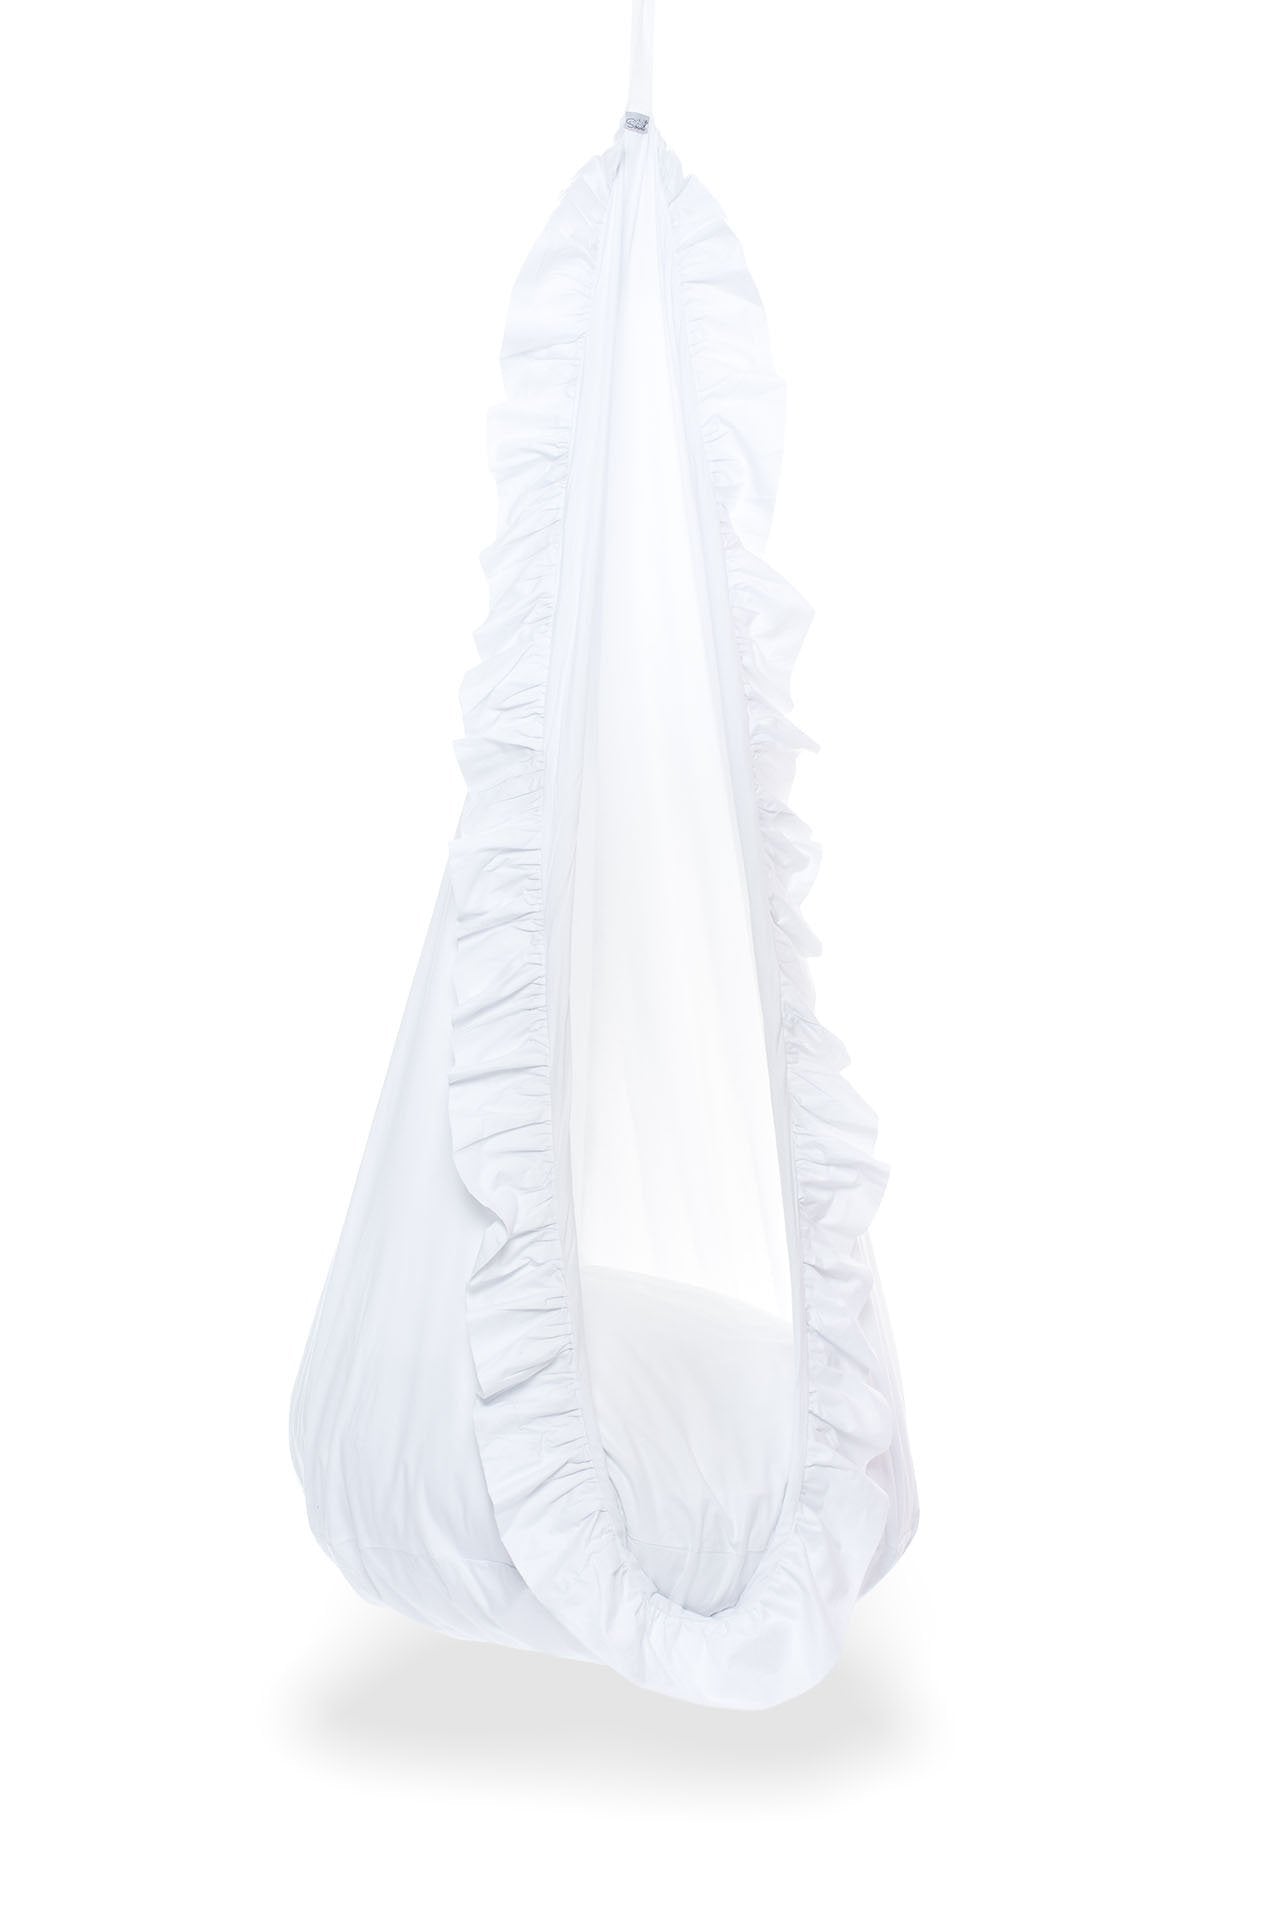 Hanging Cocoon Swing in White Frill - Play. Learn. Thrive. ™